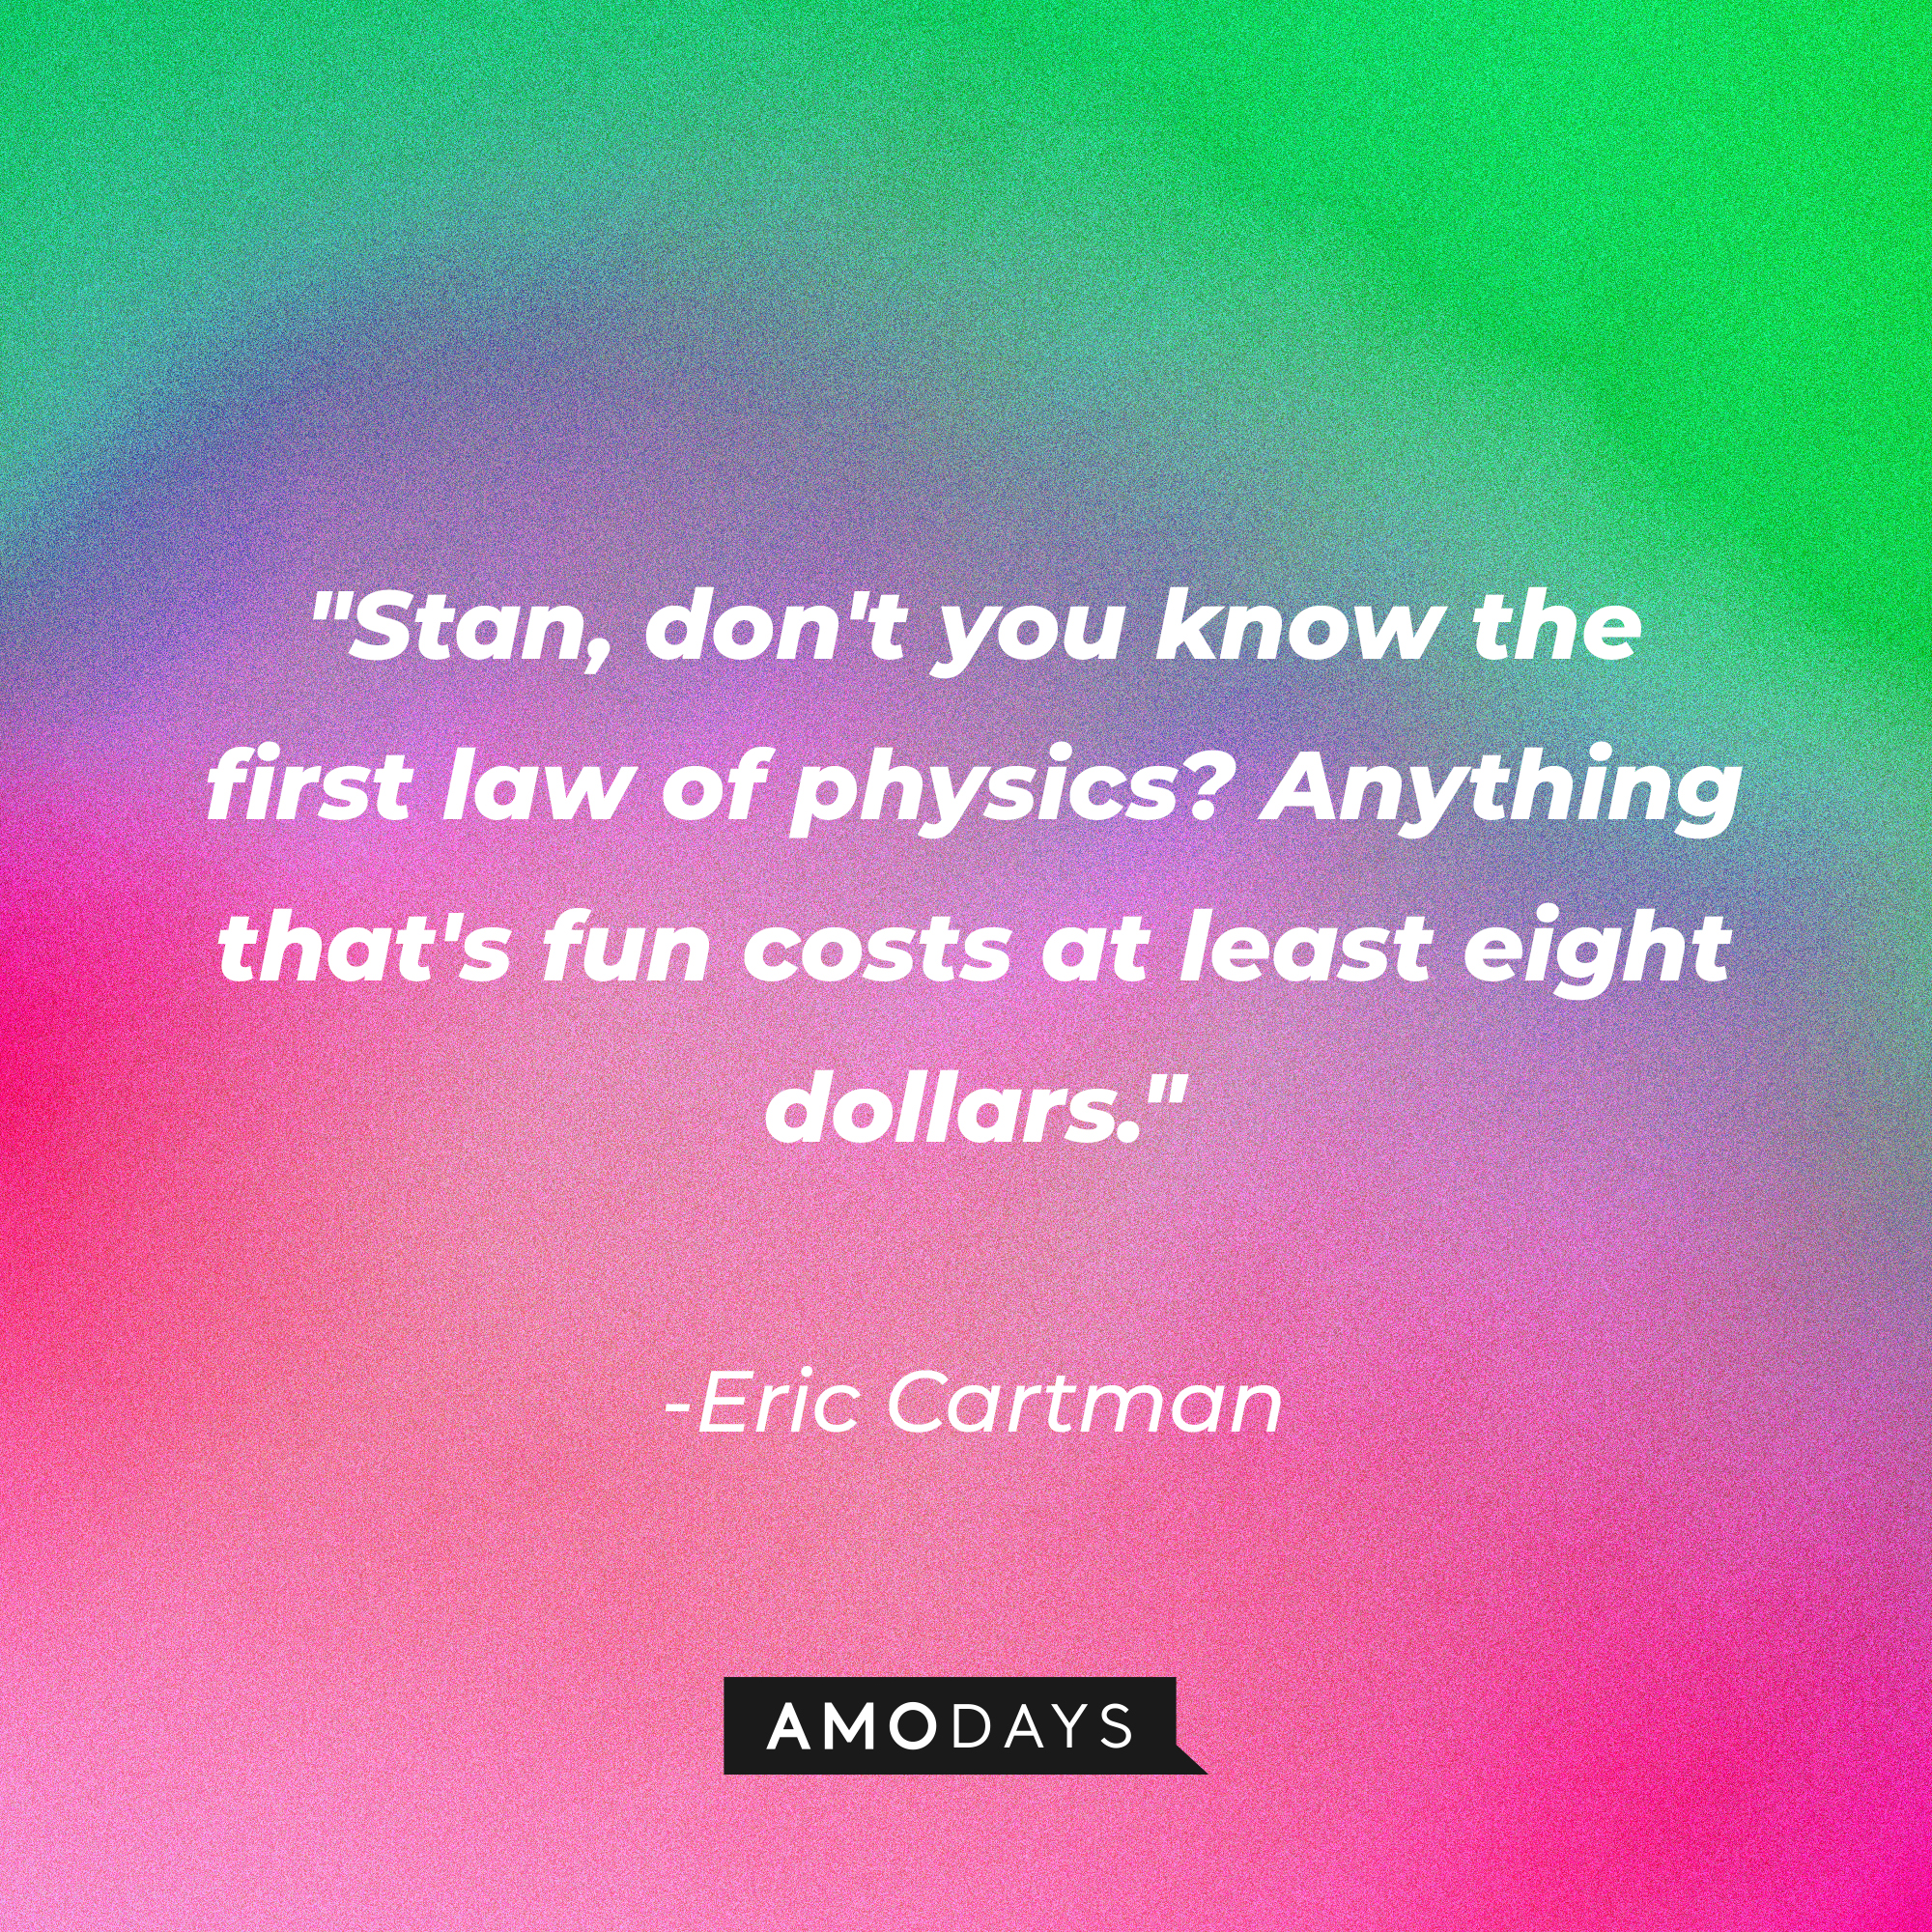 Eric Cartman's quote: "Stan, don't you know the first law of physics? Anything that's fun costs at least eight dollars." | Source: AmoDays